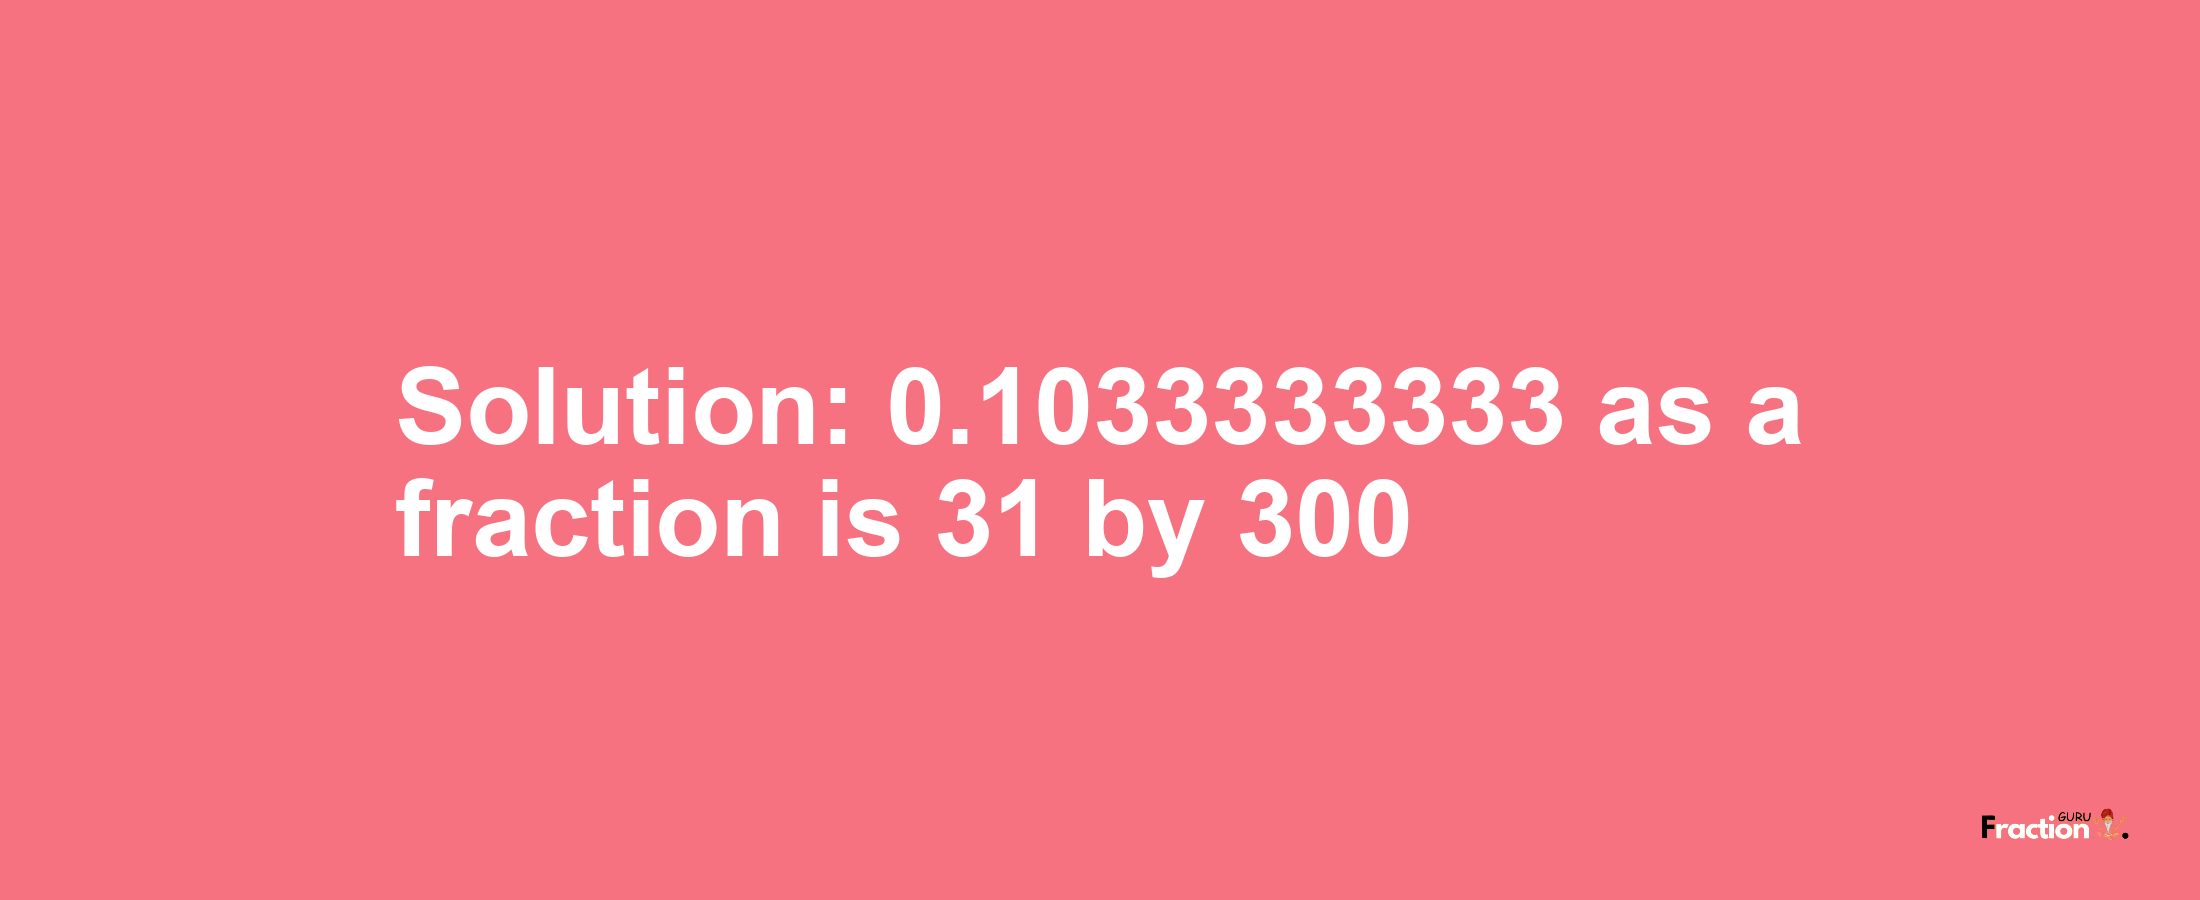 Solution:0.1033333333 as a fraction is 31/300